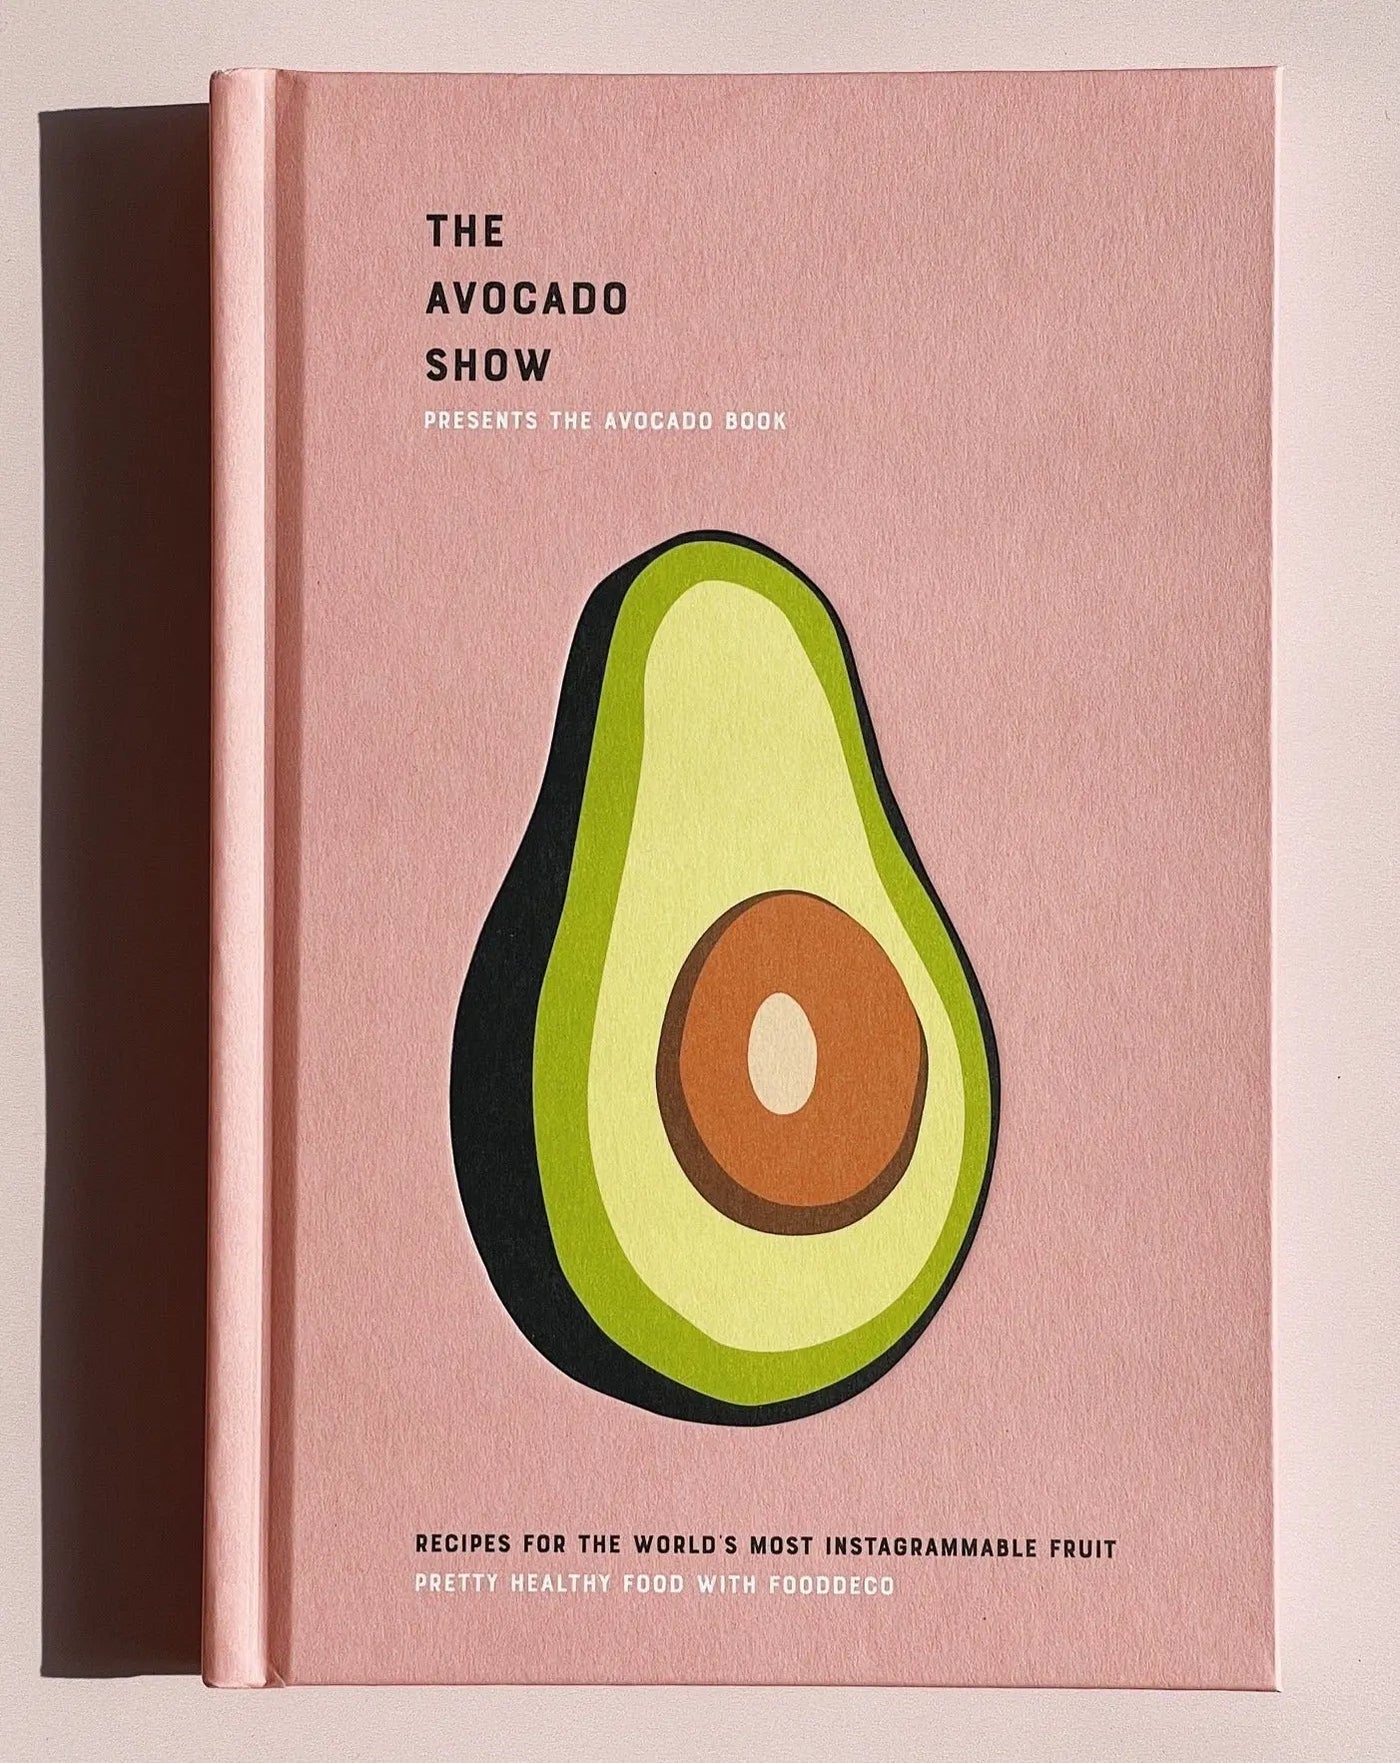 New Mags - The Avocado Show New Mags